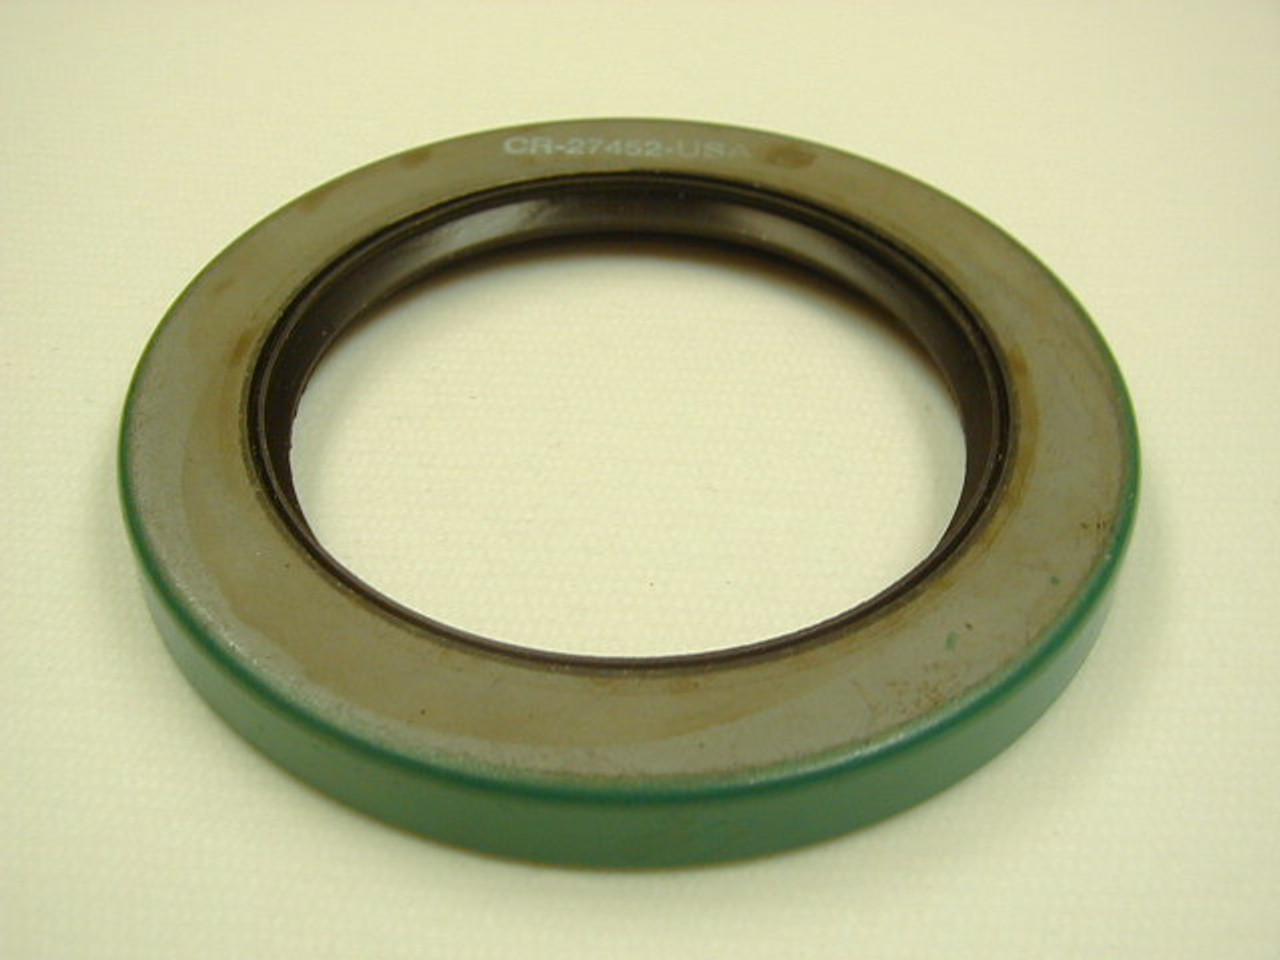 9.250" (234.95mm) Inch Reinforced Metal Double Lip Nitrile Oil Seal  92570 CRWHA1 R